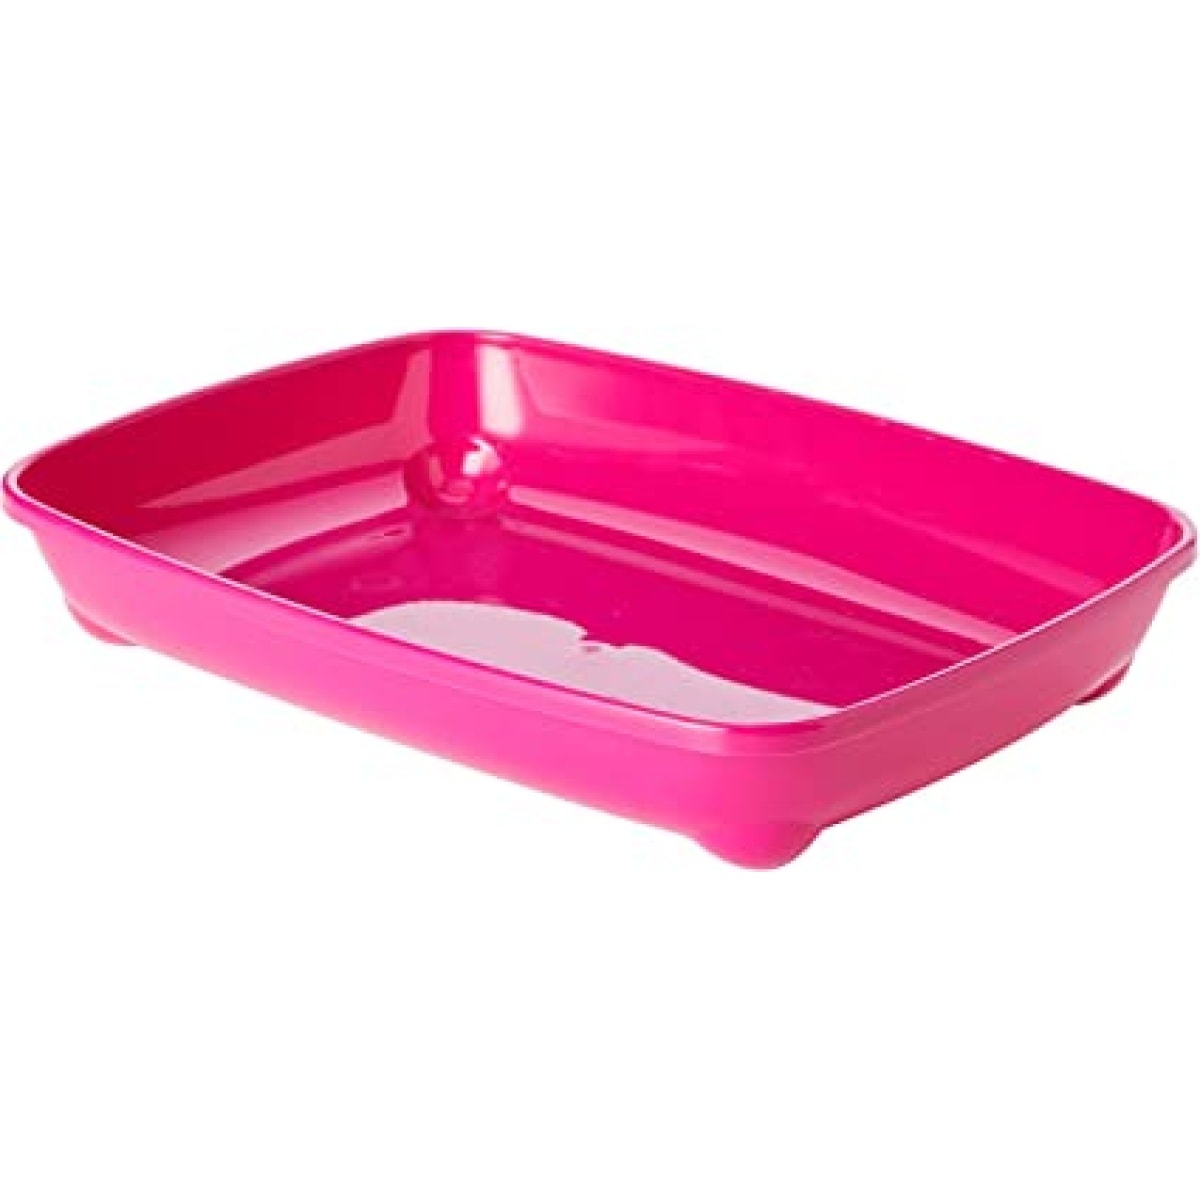 Cat Litter Tray Large - Hot Pink Main Image